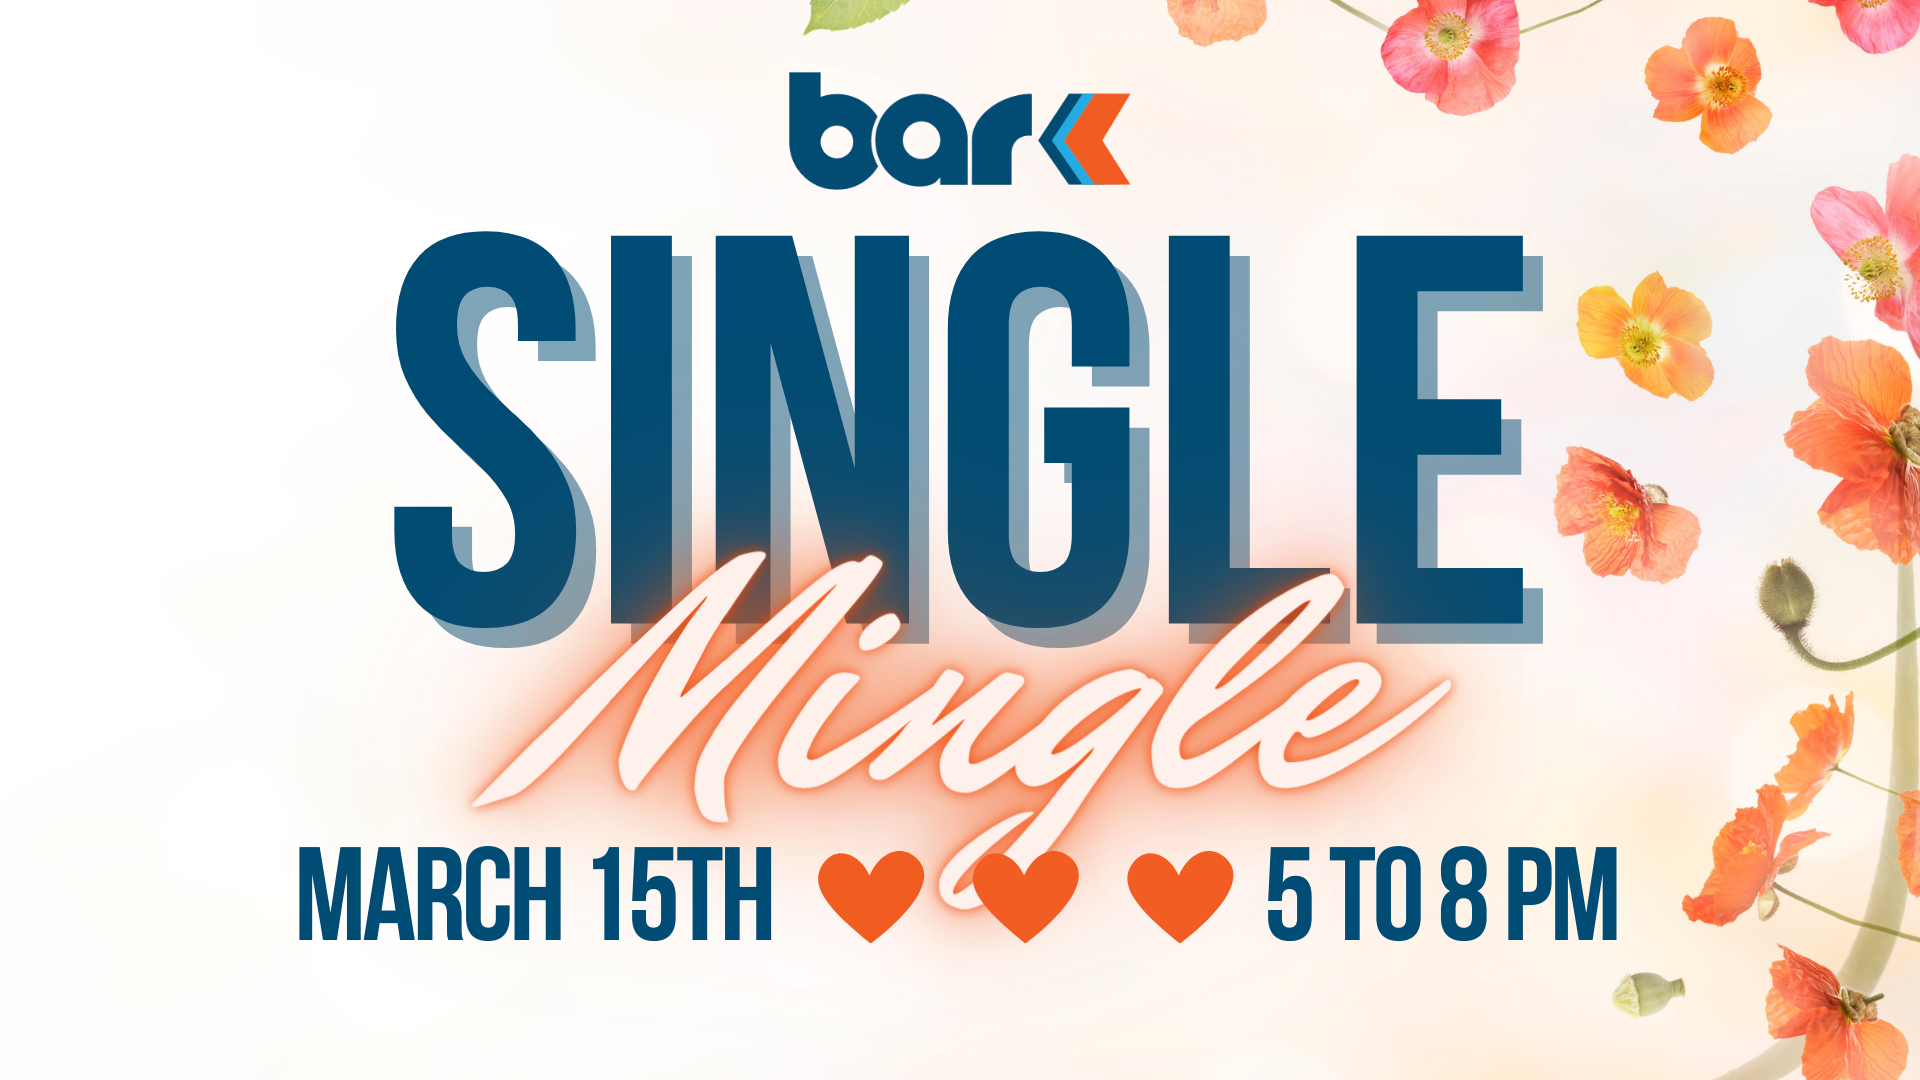 Single Mingle at Bar K on March 15th from 5 to 8 pm.